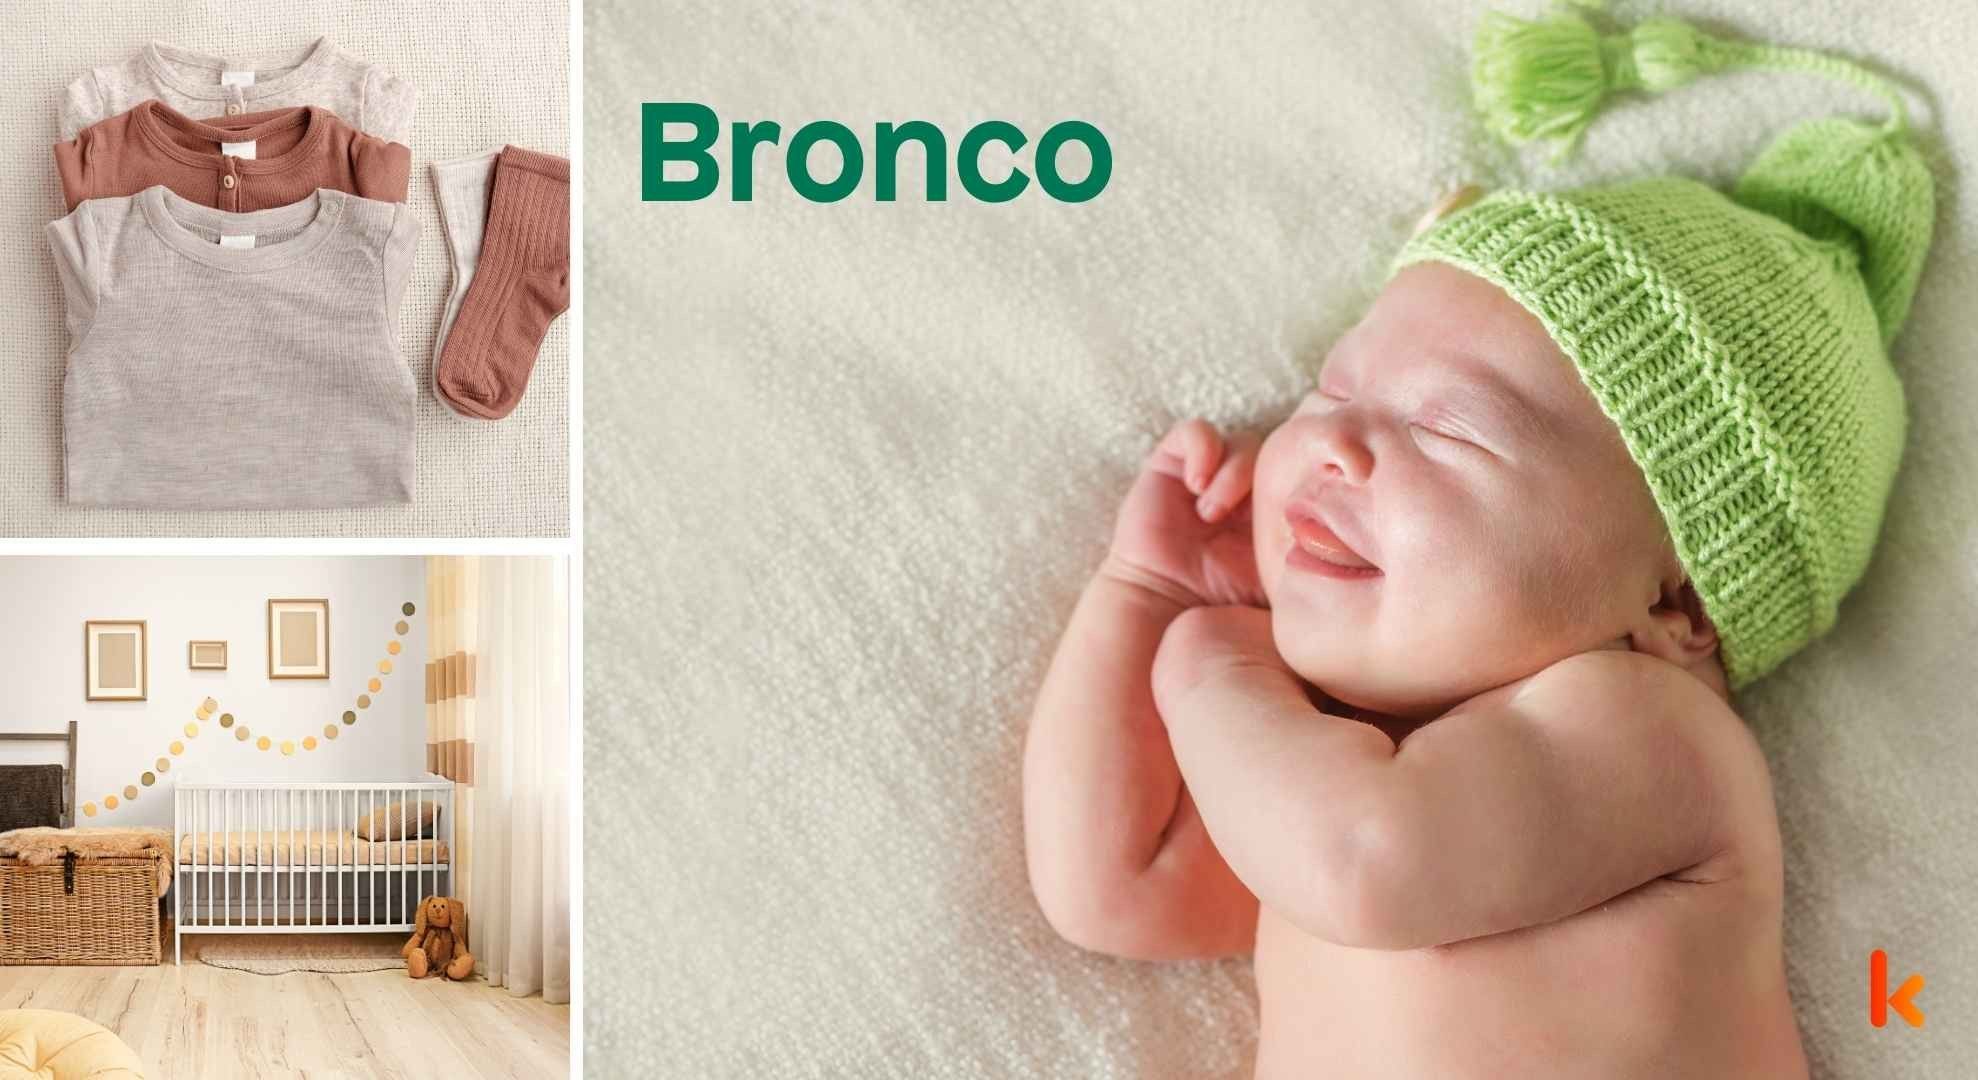 Meaning of the name Bronco